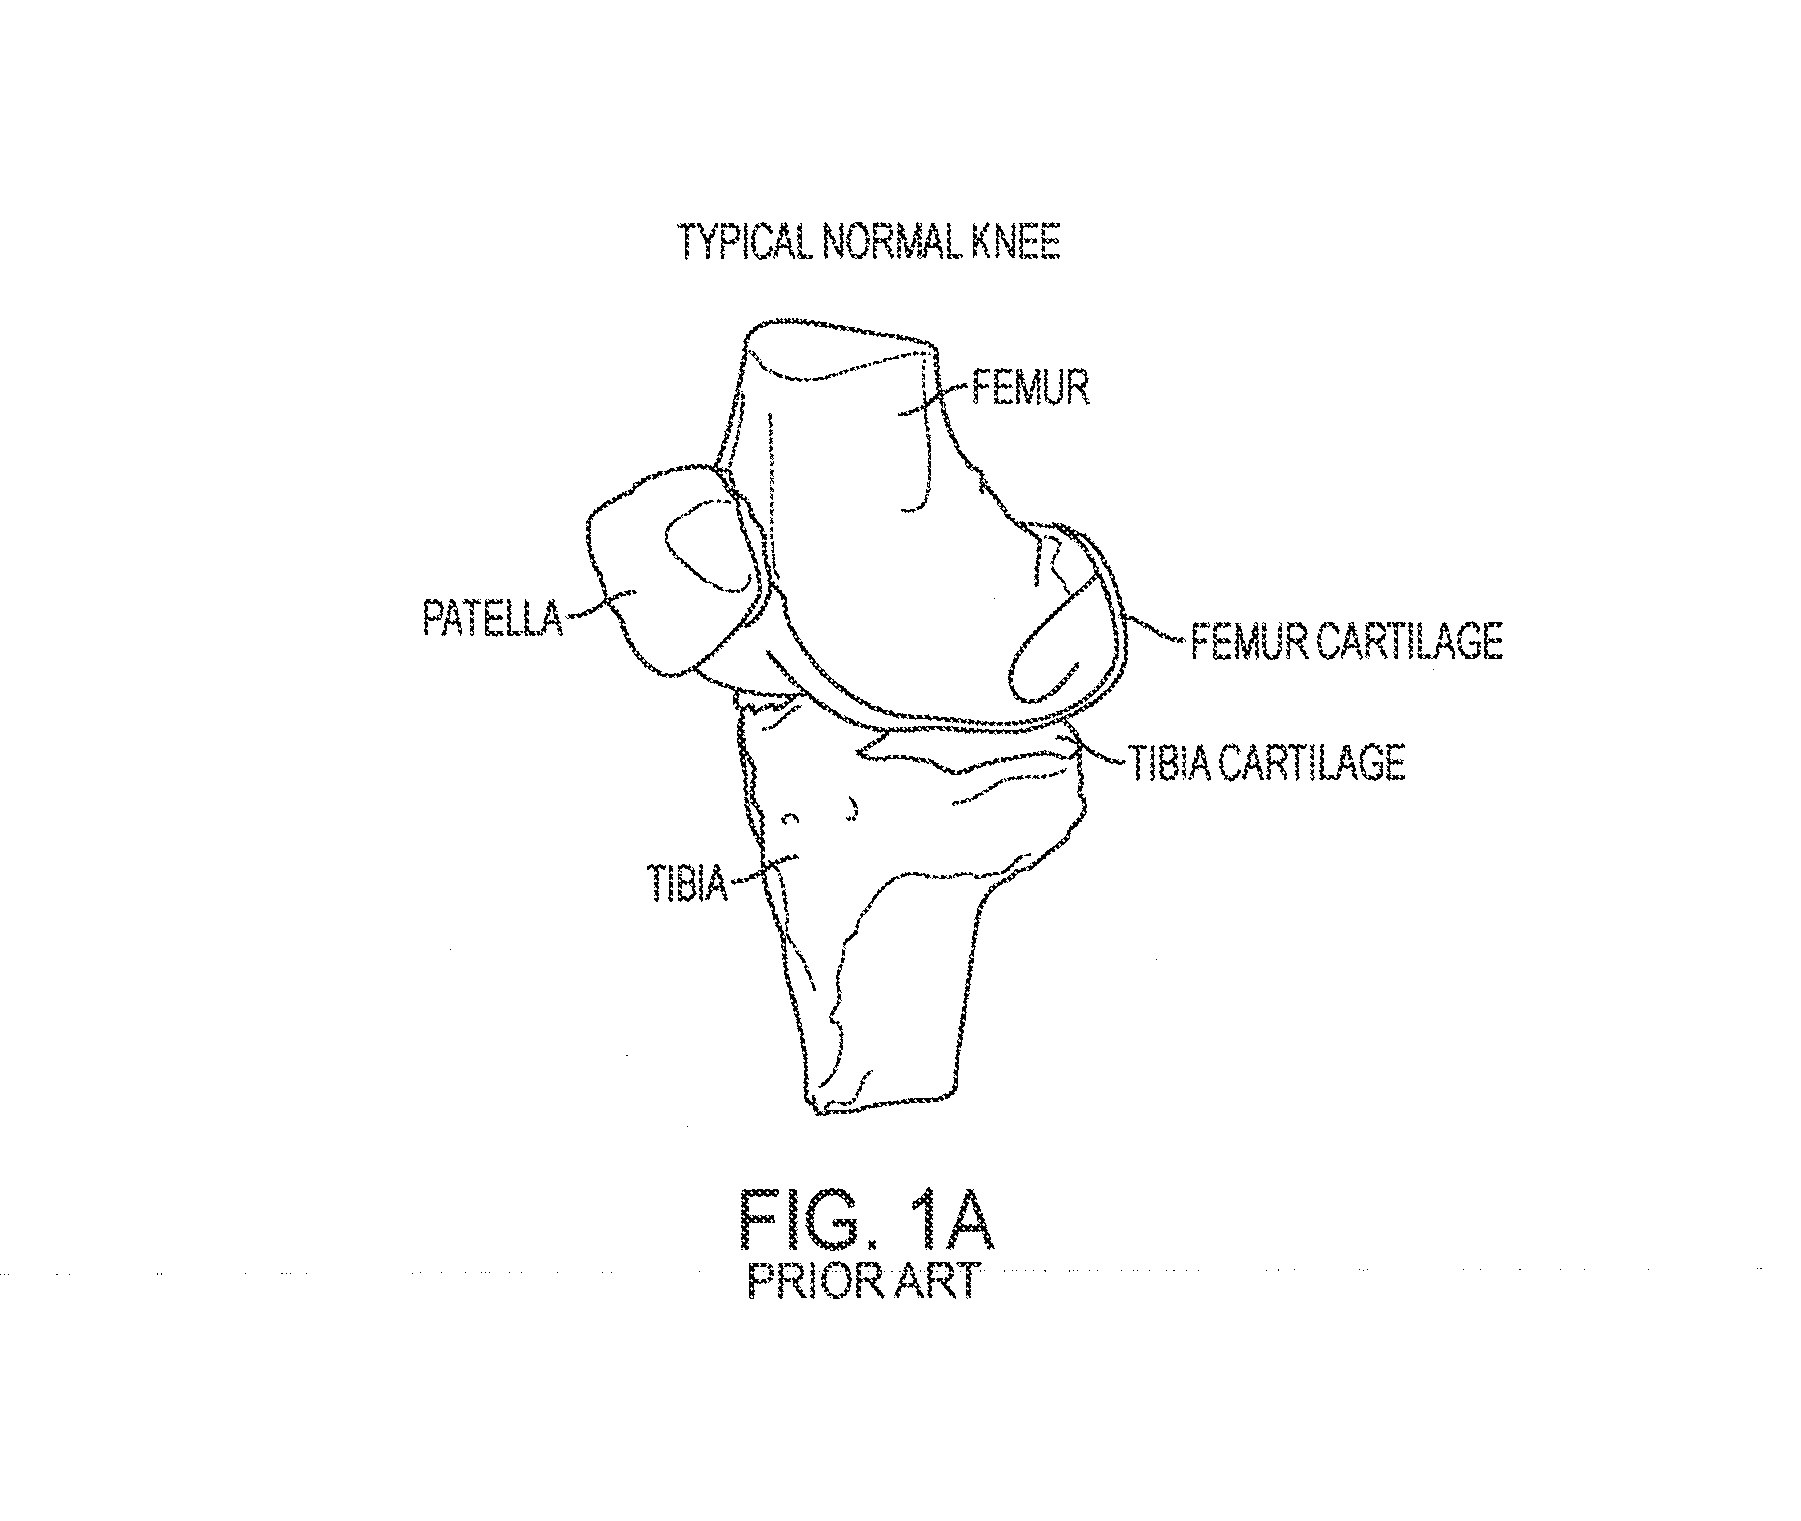 Implant for Restoring Normal Range Flexion and Kinematics of the Knee